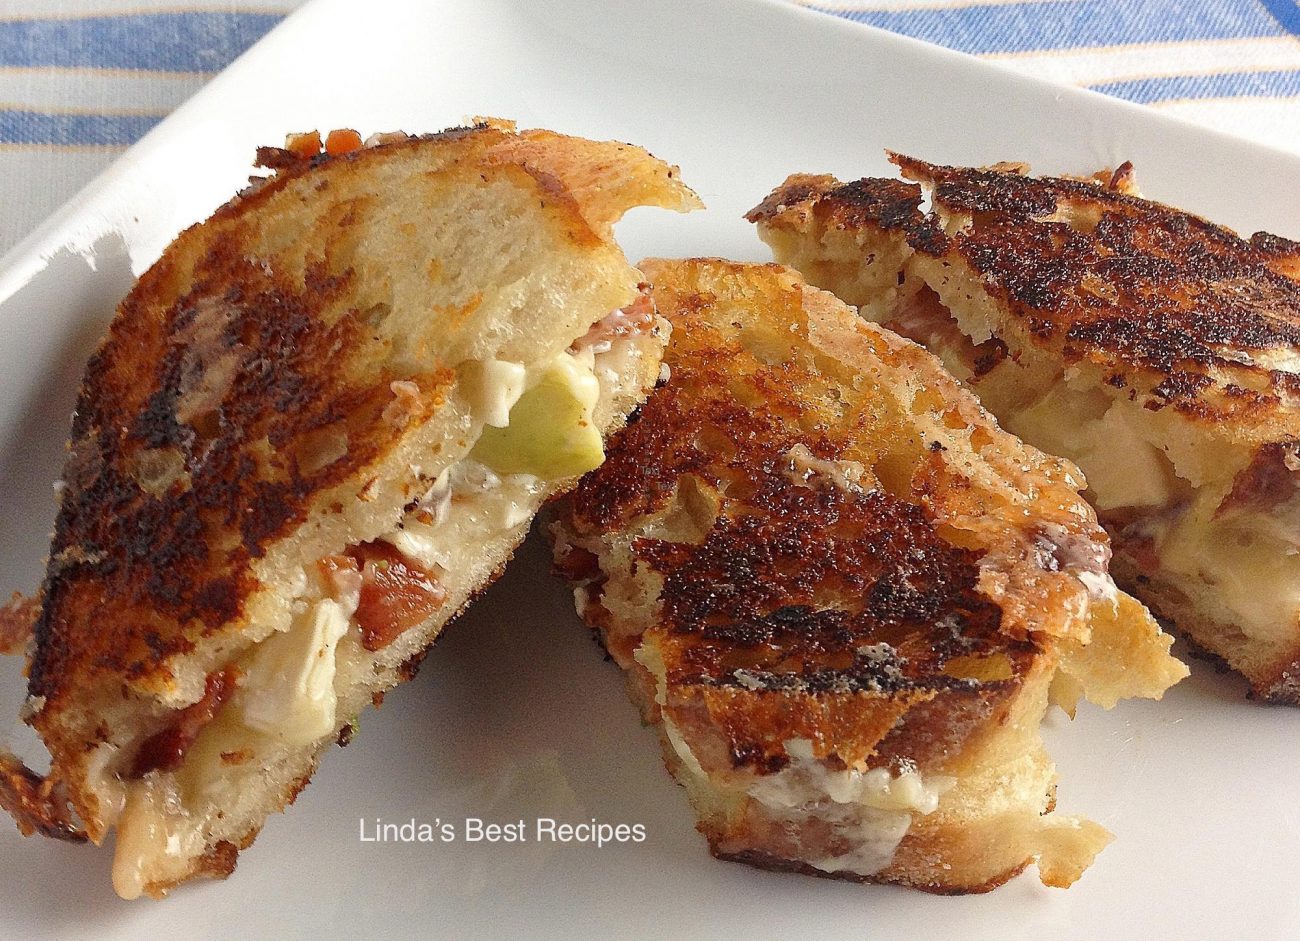 Grilled Havarti Apple and Bacon Sandwiches